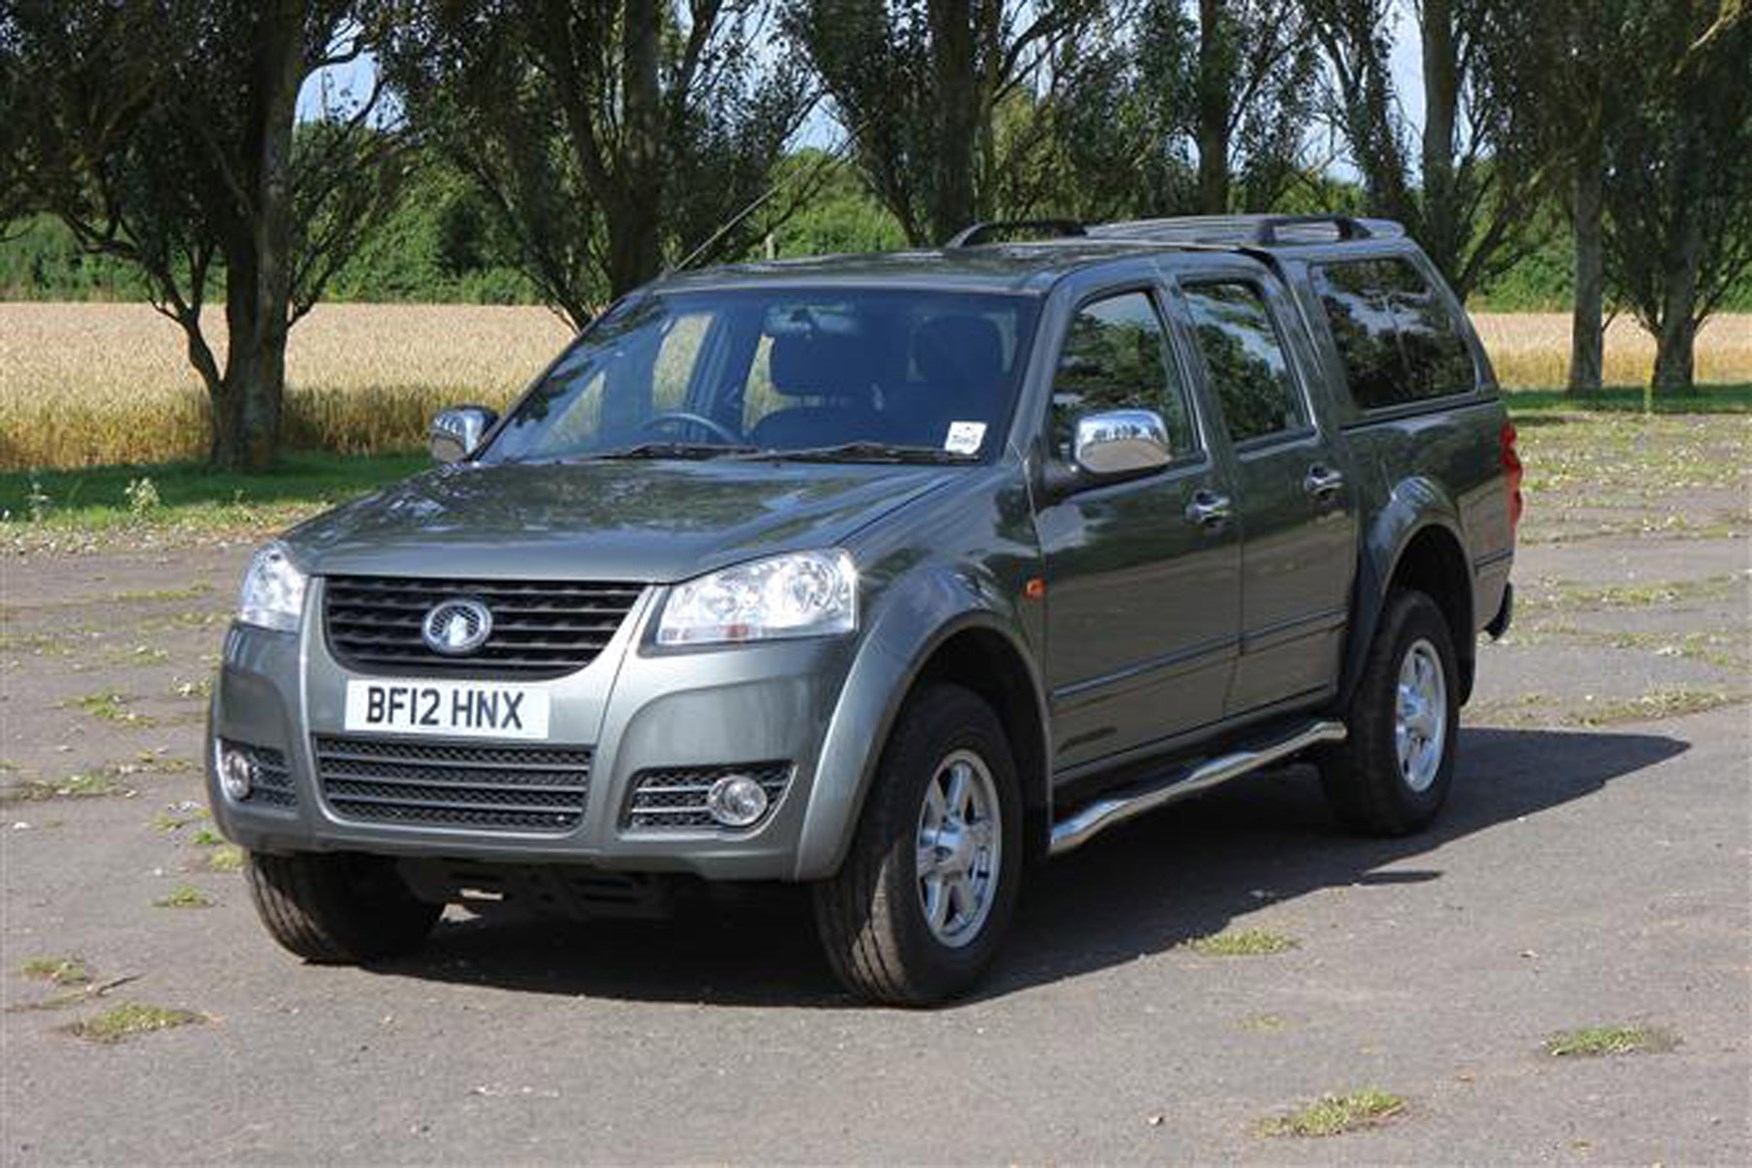 Great Wall Steed full review on Parkers Vans - front exterior